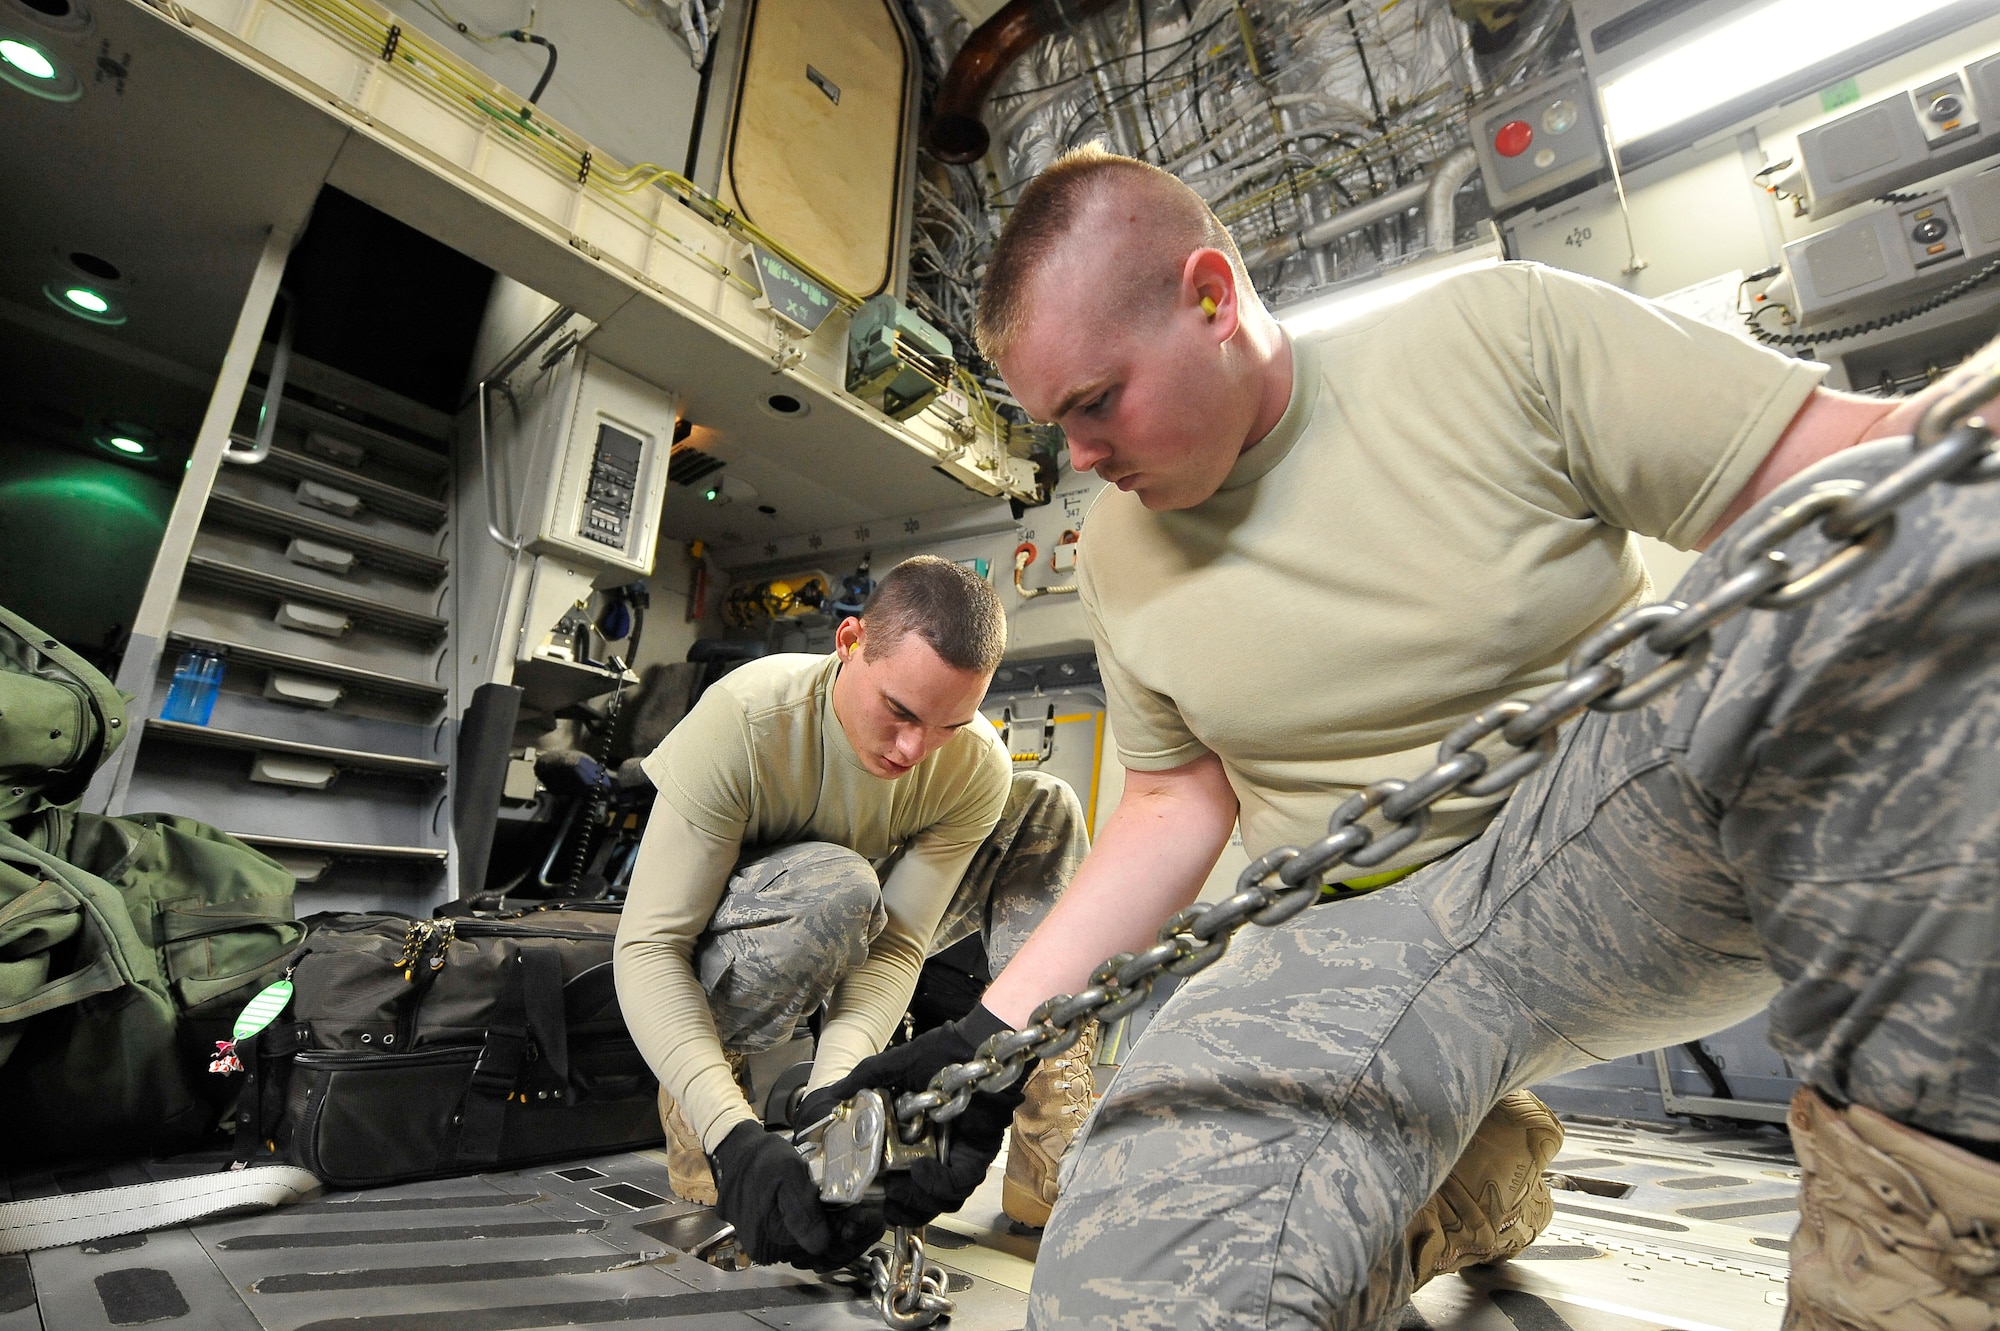 Airman 1st Class Daniel Anderson (left) and Staff Sgt. Charles Key use a tie down chain to secure one of two mine-resistant, ambush-protected all-terrain vehicles, or M-ATVs, in a C-17 Globemaster III at Charleston Air Force Base, S.C., Sept. 30, 2009.  The two M-ATVs are the first to be delivered to the Afghanistan theater for operational use. Both Airmen are air transportation specialists with the 437th Aerial Port Squadron at Charleston AFB. The C-17 is based out of McChord AFB, Wash. (U.S. Air Force photo/James M. Bowman)